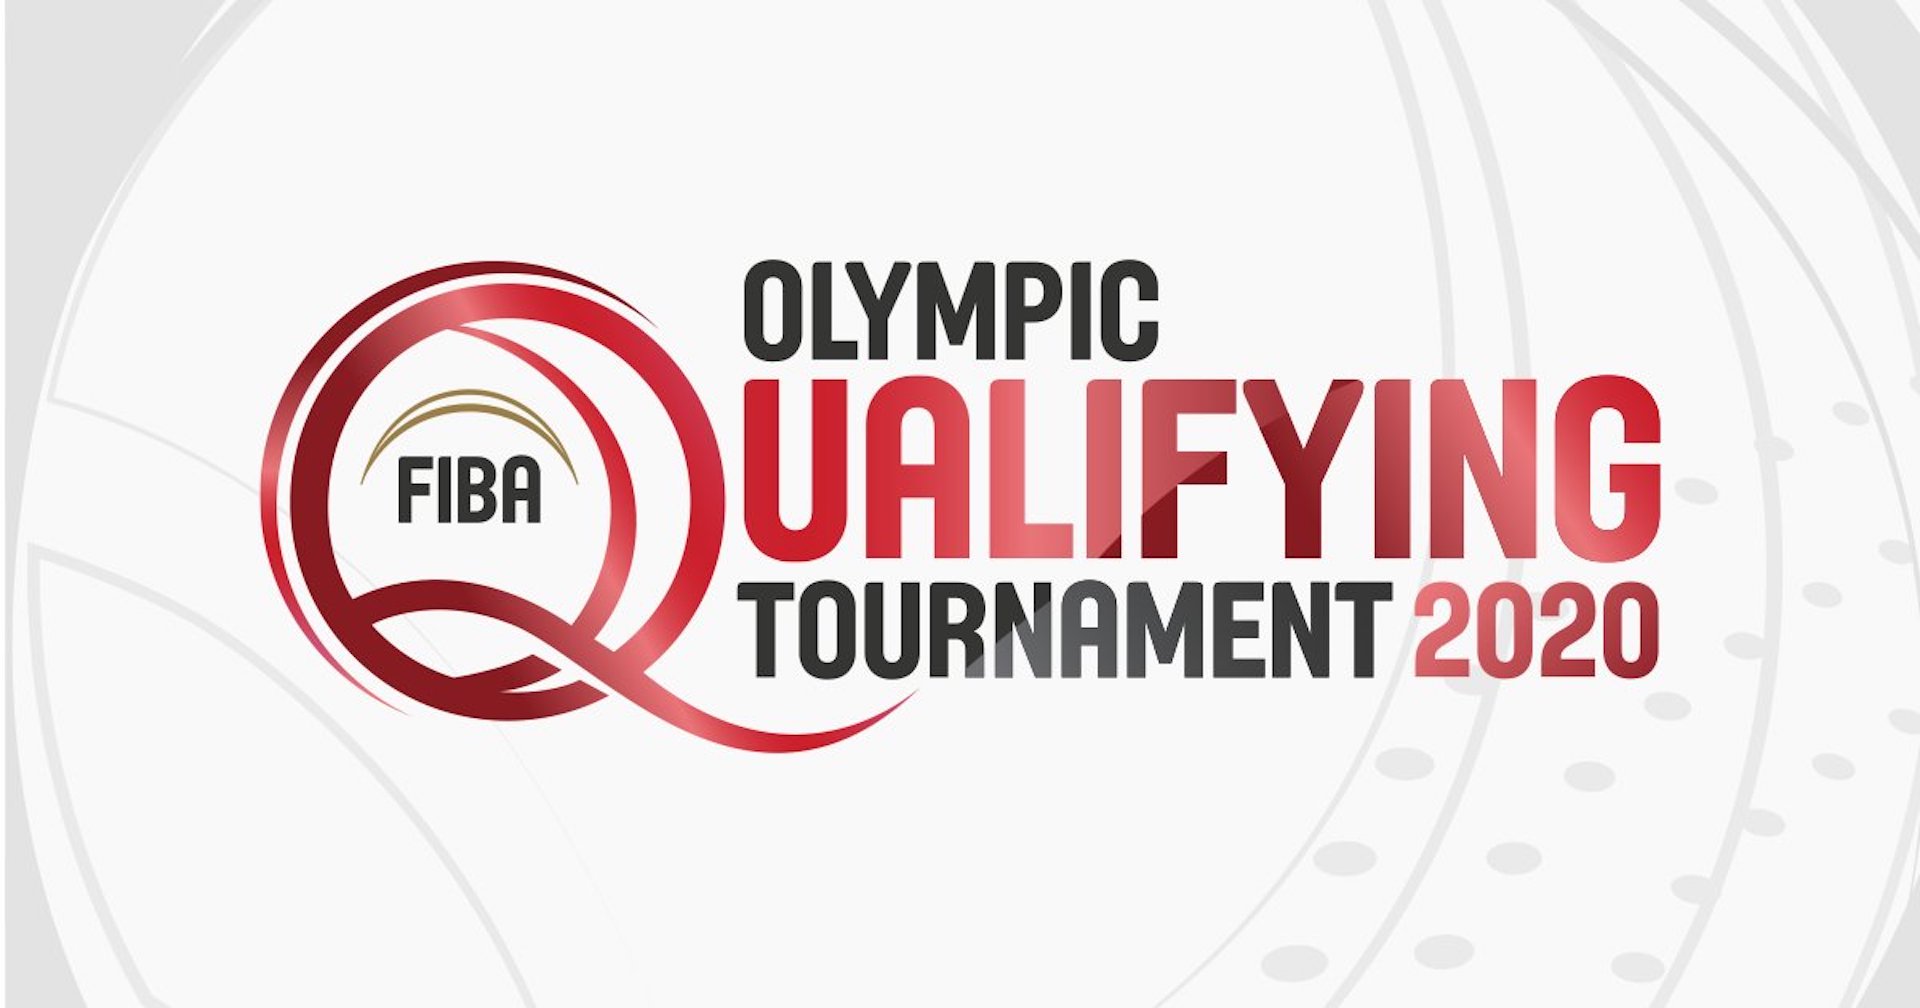 Gilas Pilipinas to compete in FIBA Olympic Qualifying Tournament - TrueID